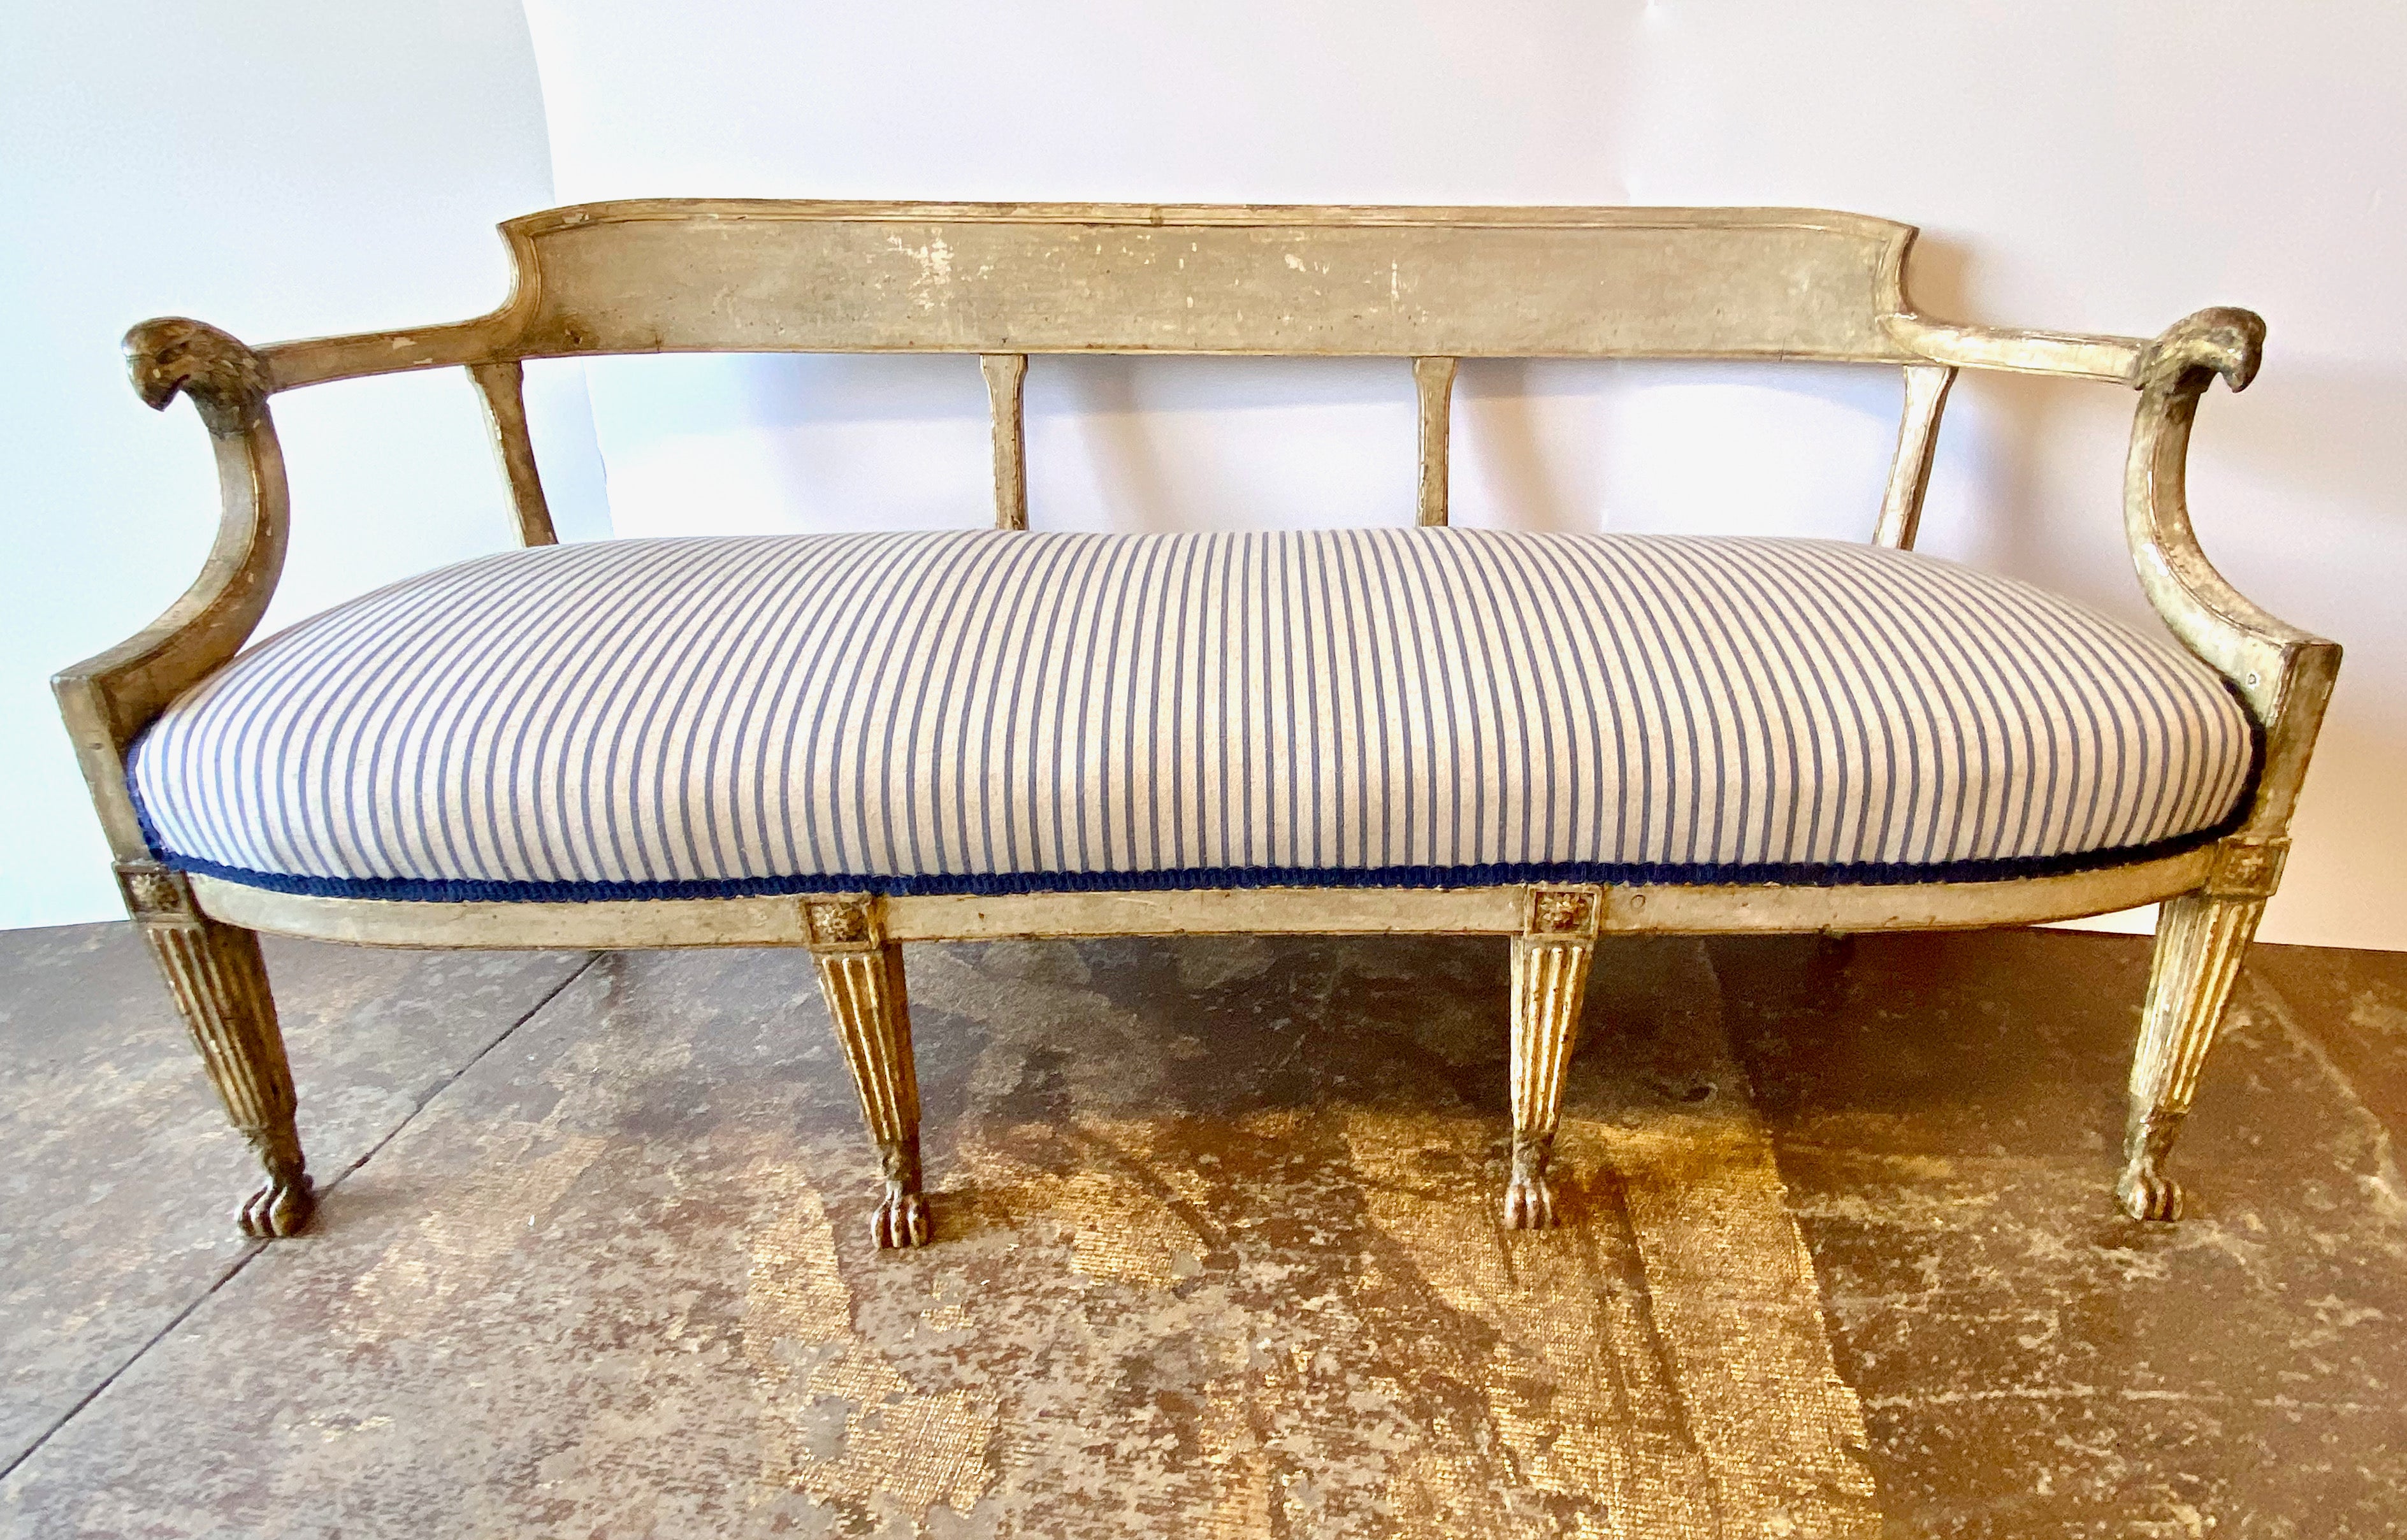 This is a beautifully elaborated c. 1800 Swedish Gustavian bench or settee. The bench retains its original painted surface which has acquired a superb natural patina over its 200 years of life. The bench features a curved shaped wooden back which